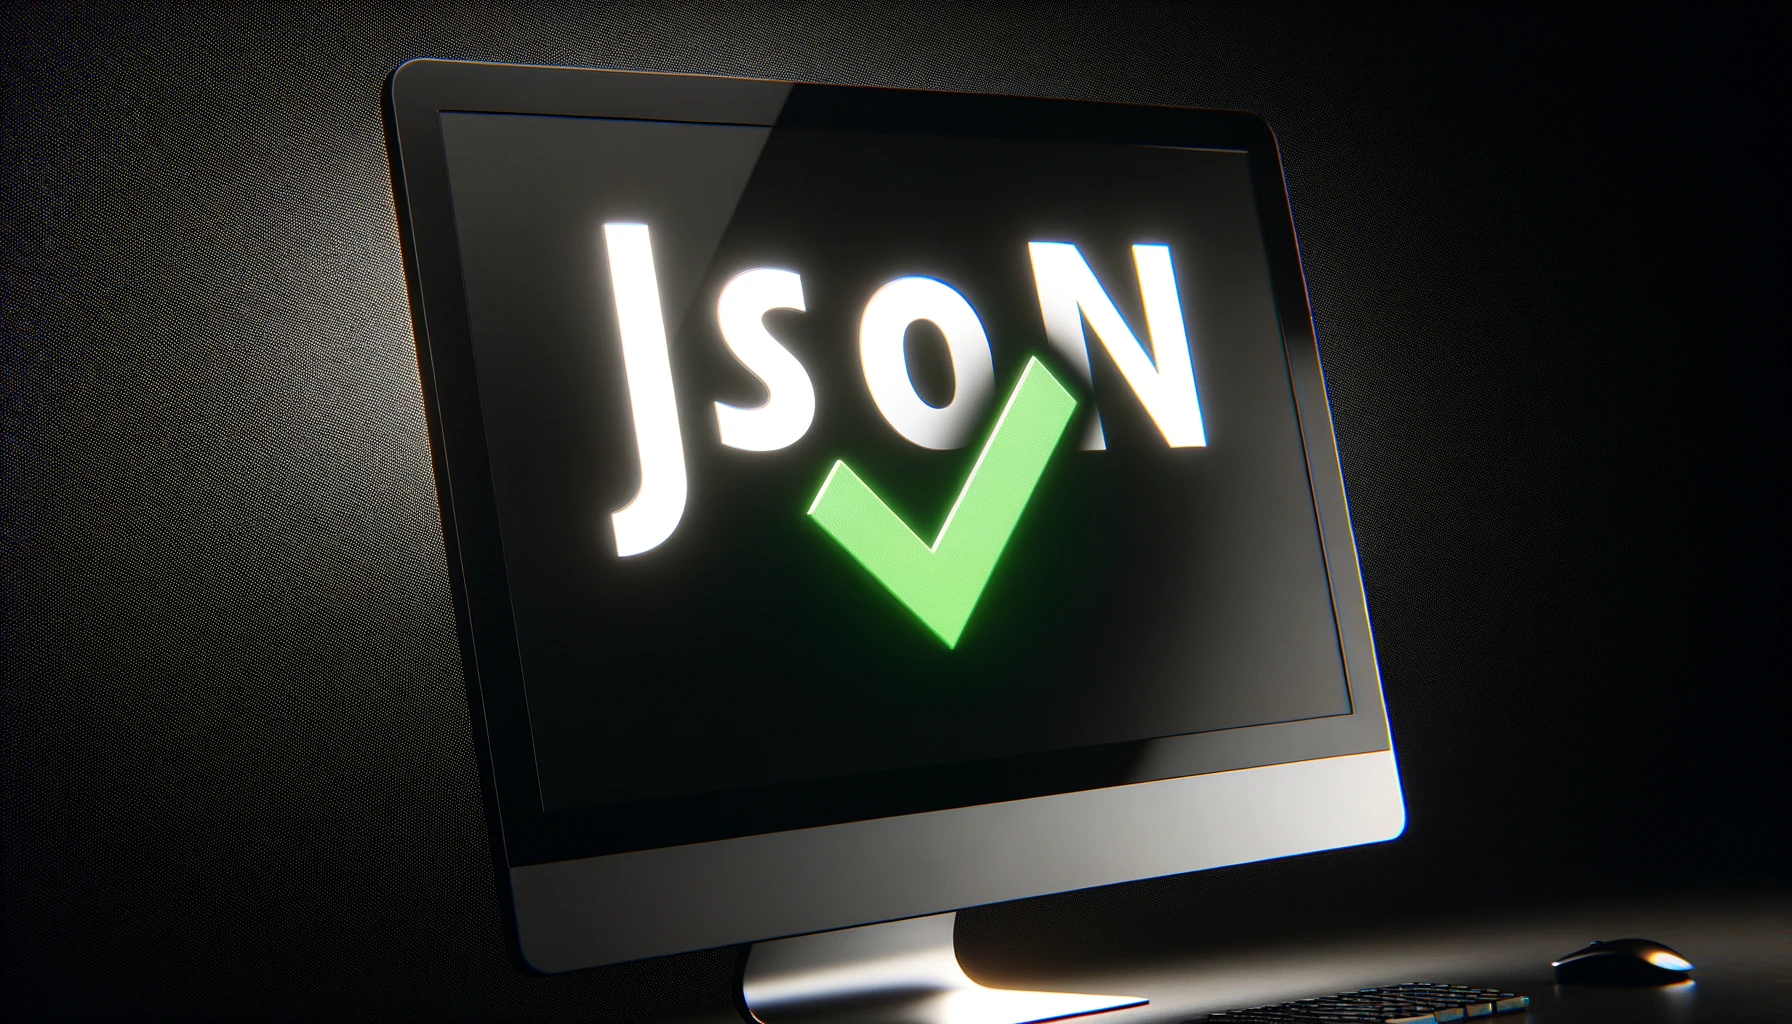 jsonchema: Custom type, format and validator in Python